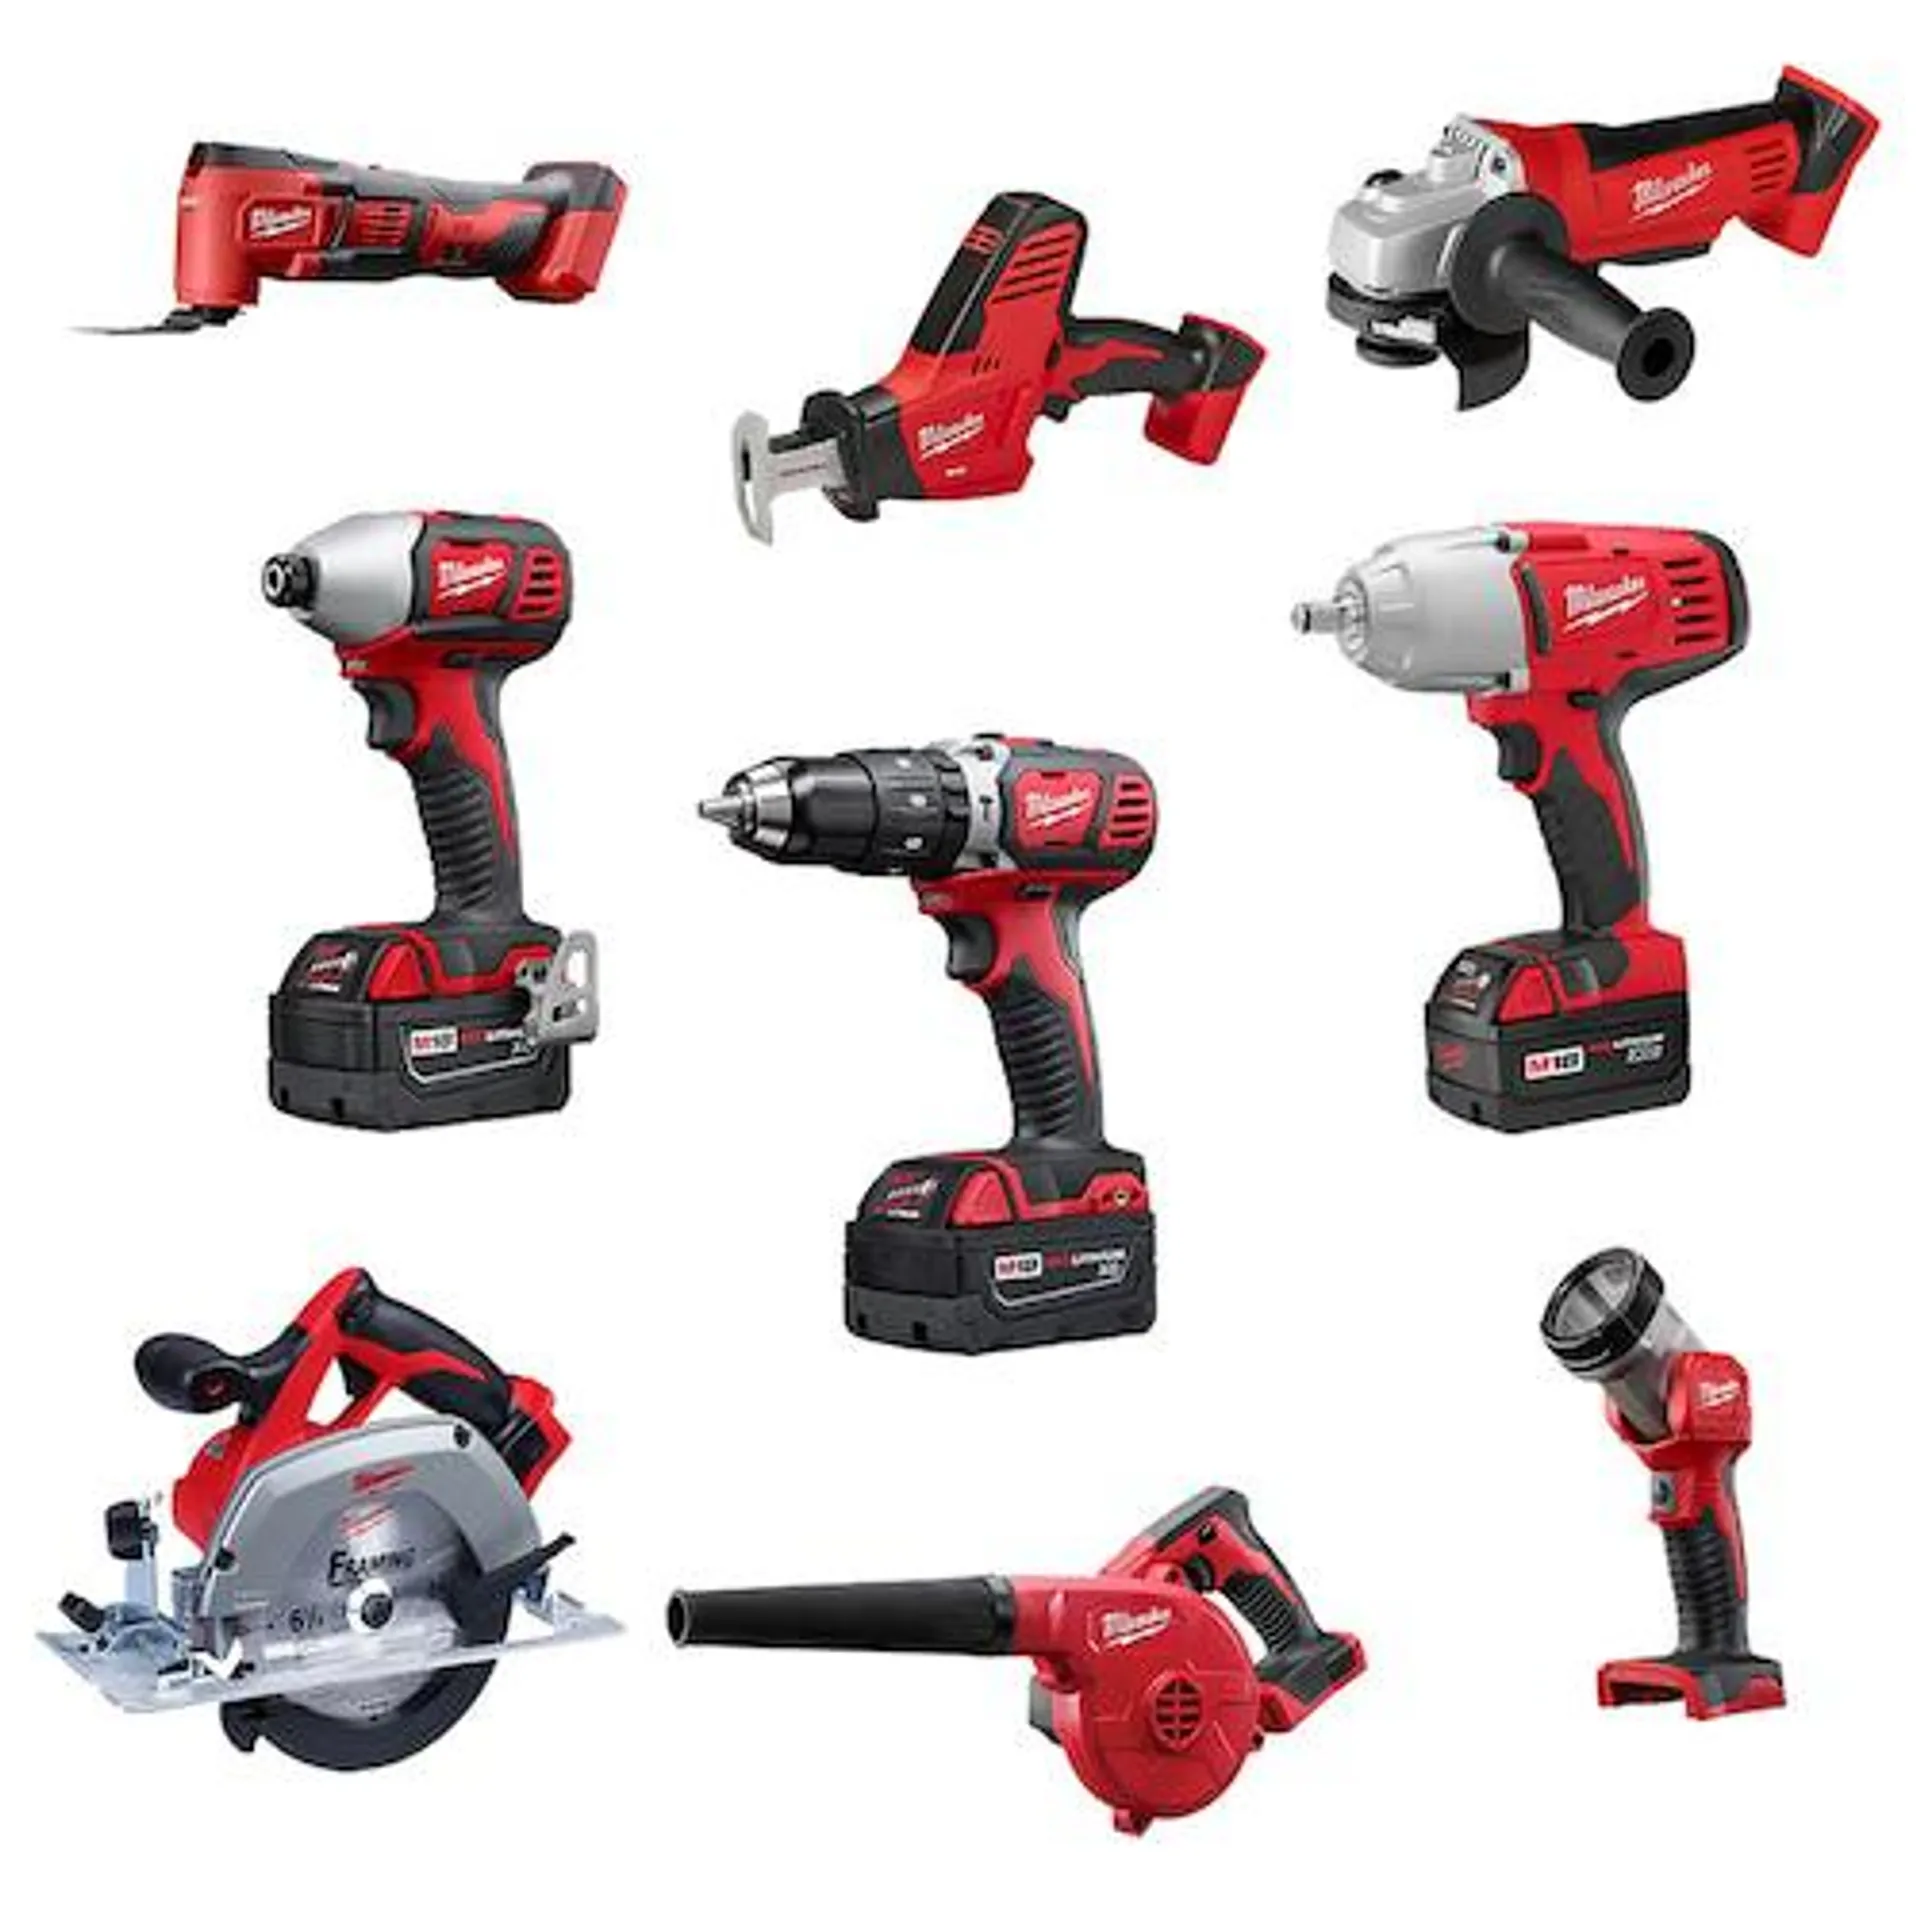 M18 18V Lithium-Ion Cordless Combo Tool Kit (9-Tool) w/ (3) 4.0 Ah Batteries, Charger & Tool Bag